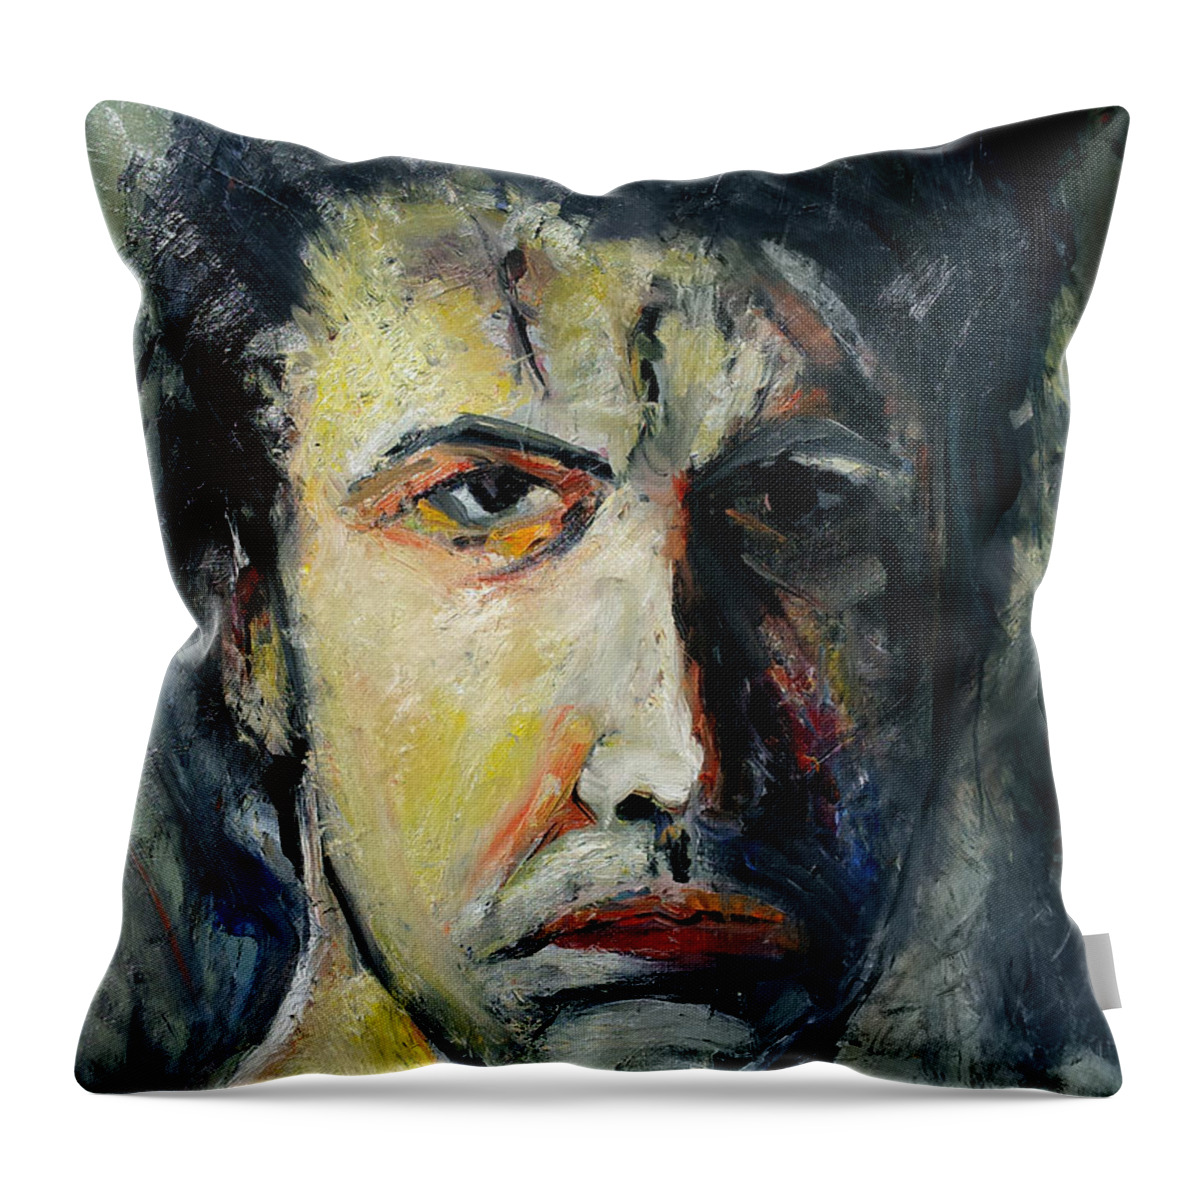 Self Portrait Throw Pillow featuring the painting Self Portrait Gray Green by John Gholson